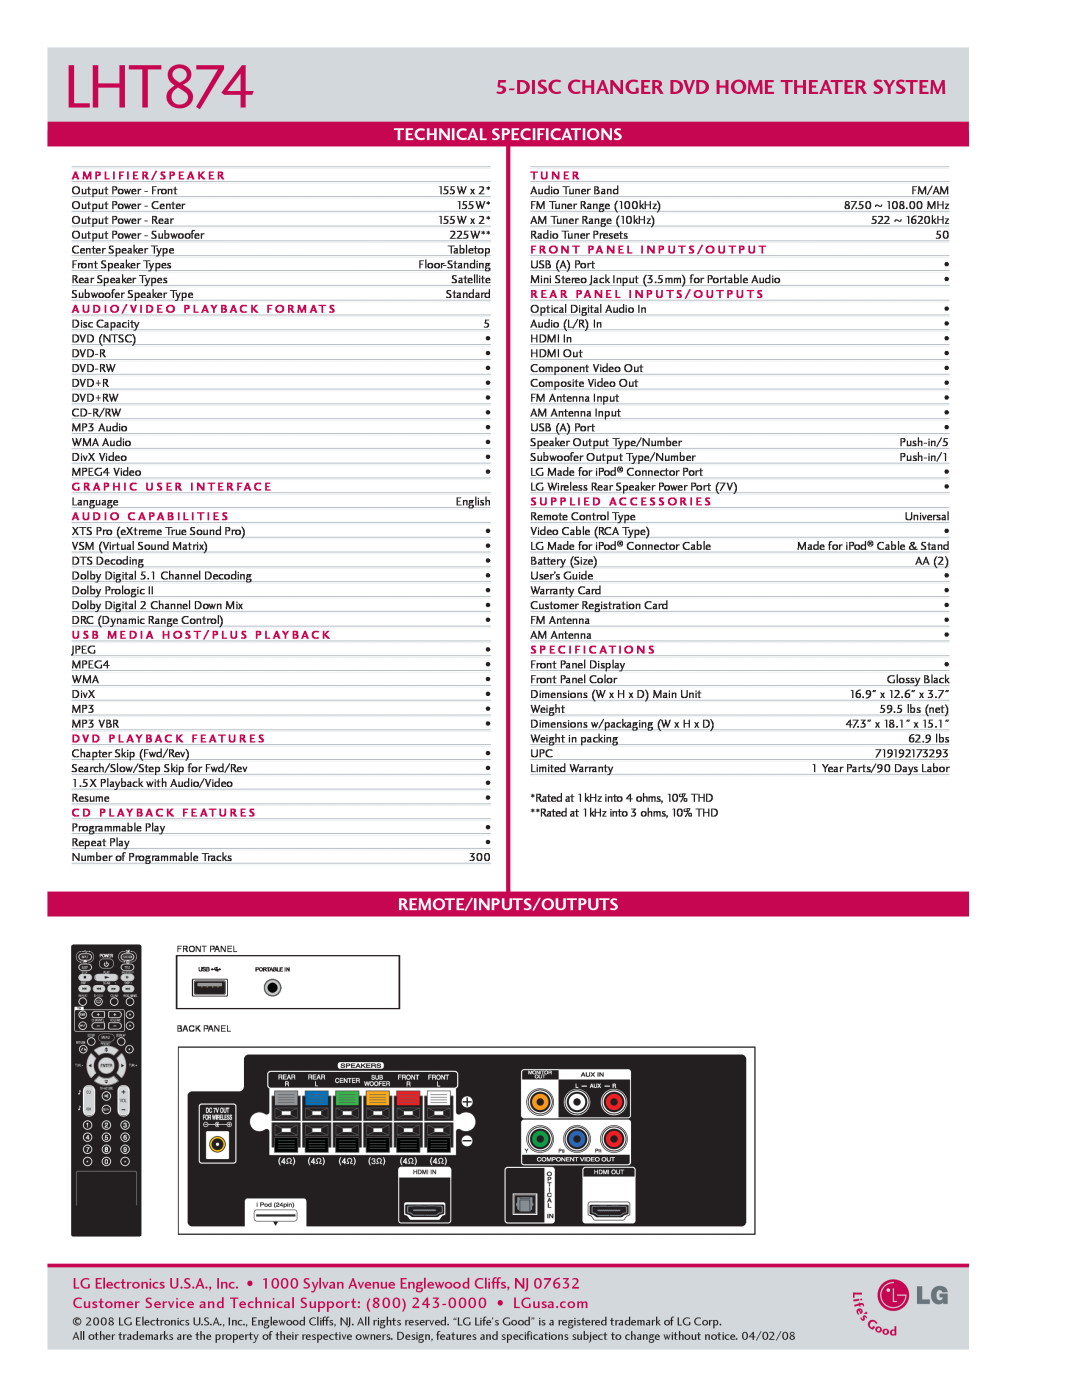 LG Electronics LHT874 manual DiscChanger DVD Home Theater system, Technical Specifications, Remote/Inputs/Outputs 